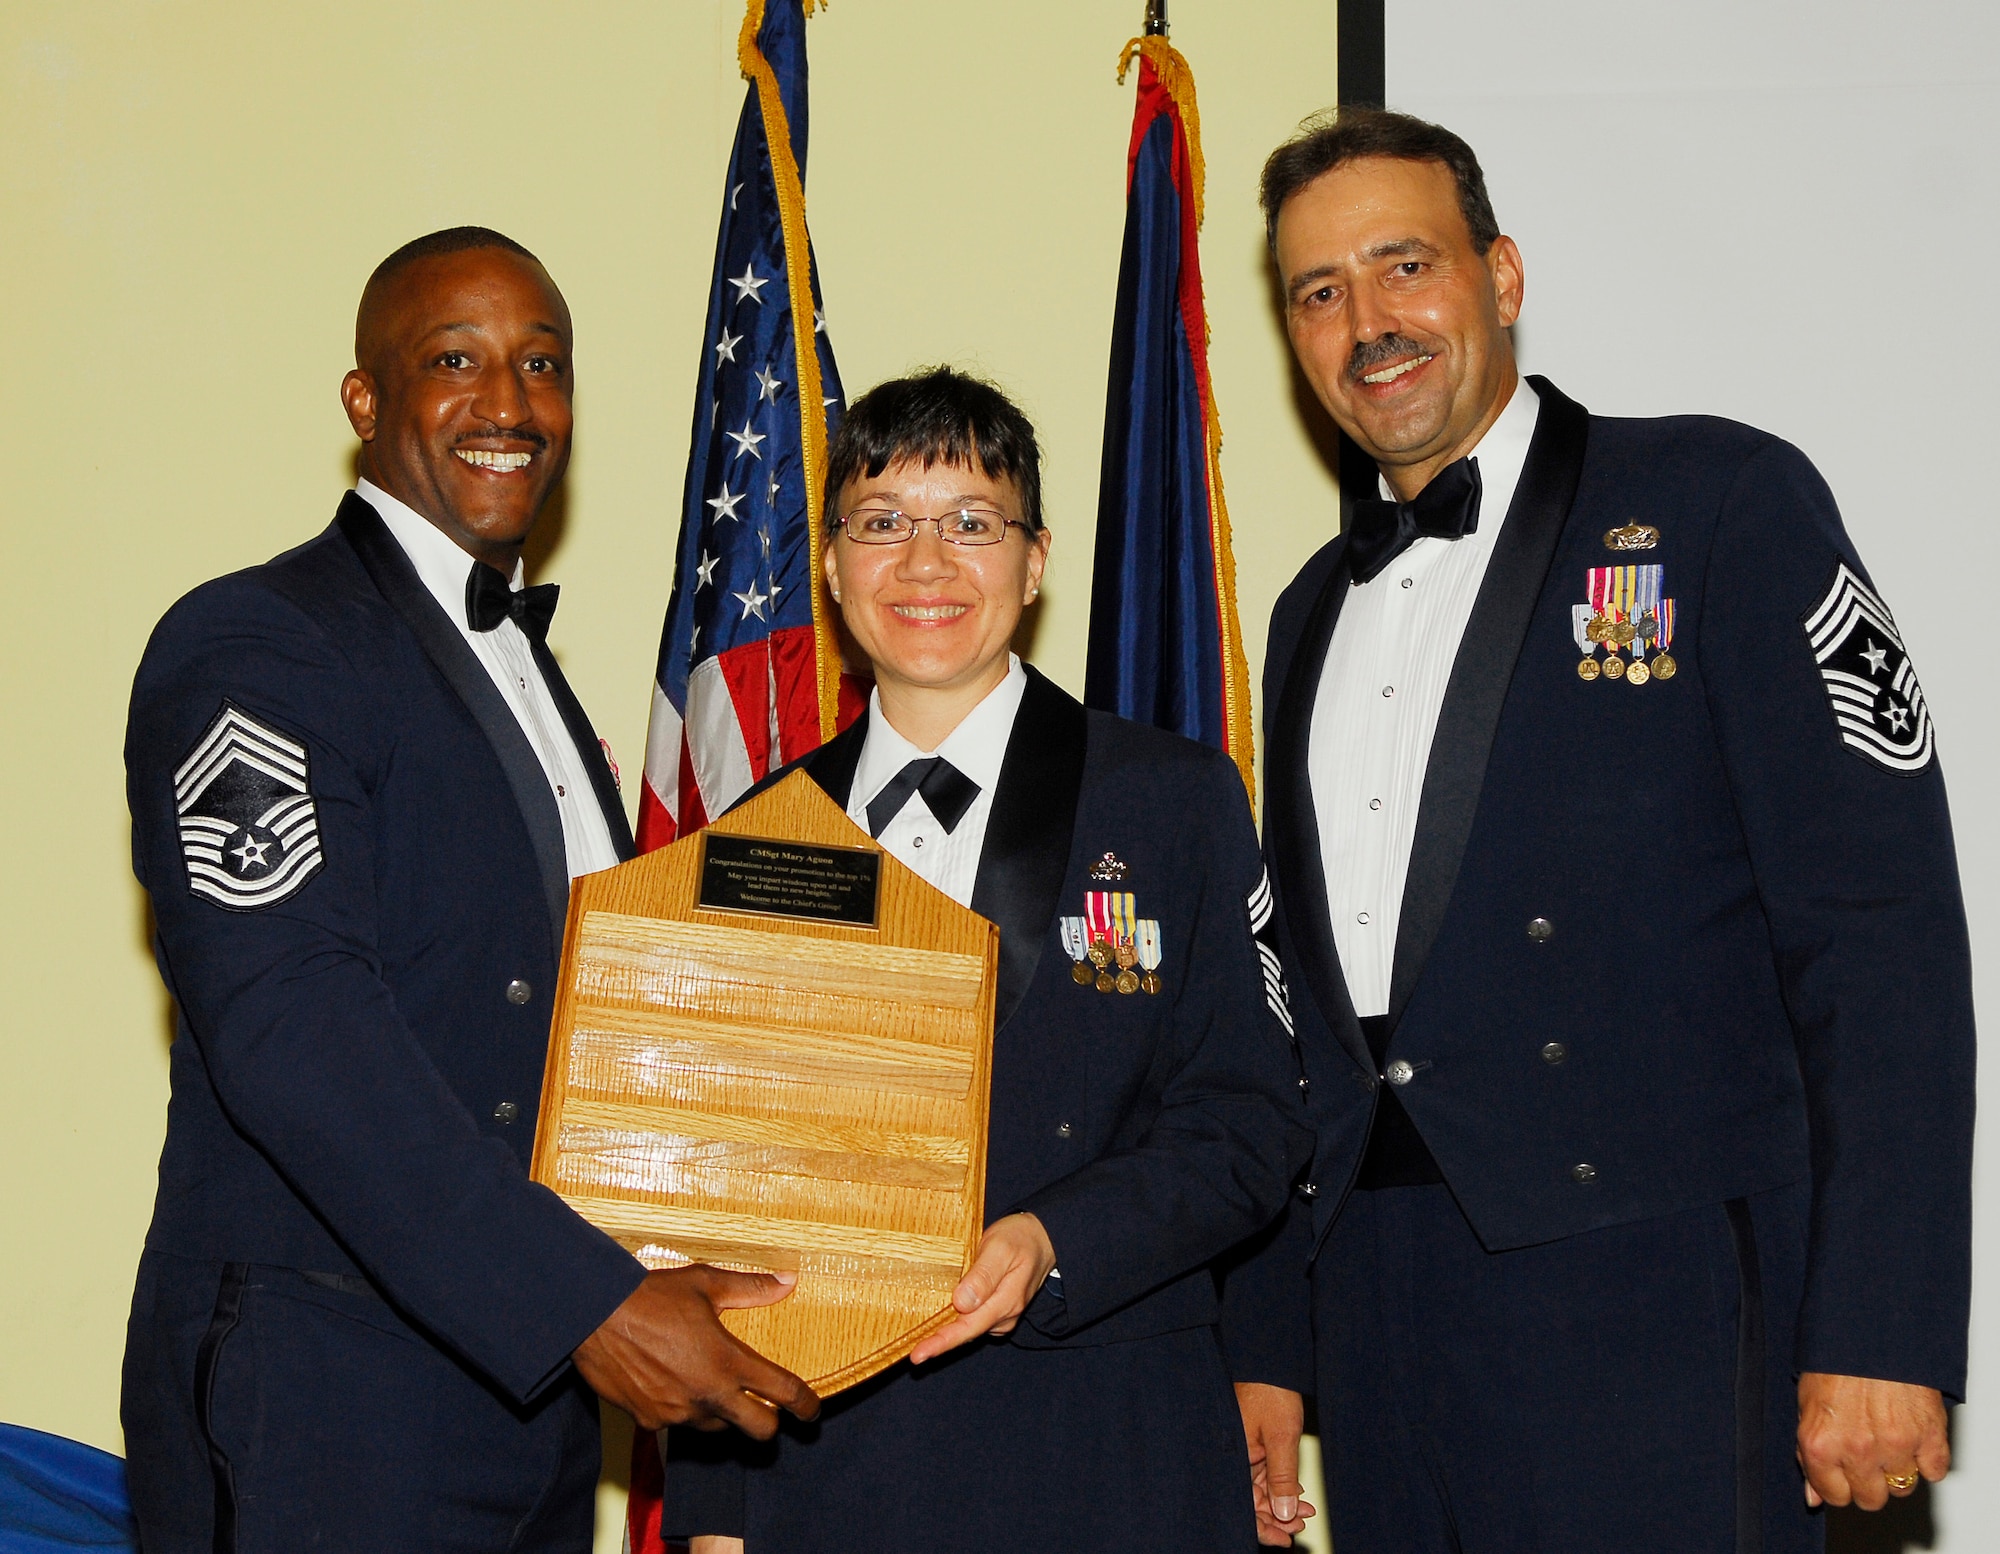 Chief Master Sgt. promotee Mary F. Aguon (center), 44th Aerial Port Squadron, recieves a chief chevron shaped coin holder from Chief Master Sgts. Vincent Eubanks (left), 36th Security Forces Squadron, and Saniford Andree (right), 36th Wing command chief master sergeant, during a chief induction ceremony Feb. 22. The plaque on it reads, "Congratulations on your promotion to the top 1%. May you impart wisdom  upon all around lead them to new heights. Welcome to the chief's group." (U.S. Air Force photo/Tech. Sgt. Michael Boquette)